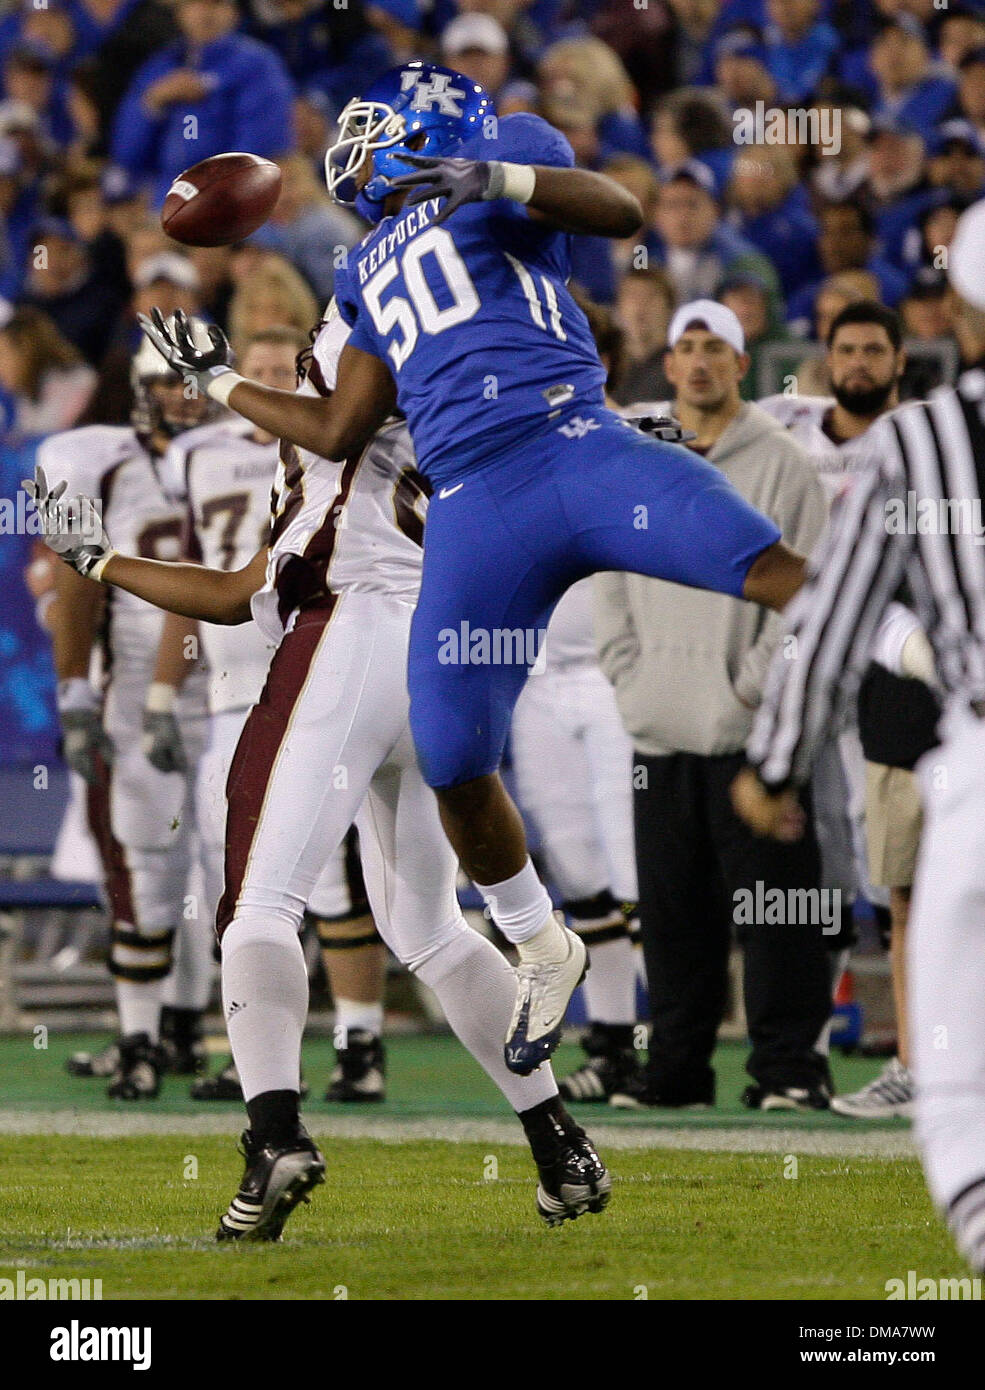 Kentucky's Sam Maxwell, 50, could not pull in this interception after breaking up a first half pass as Kentucky played Louisiana Monroe on Saturday October 24, 2009 in  Lexington, Ky. Photo by Mark Cornelison | Staff  (Credit Image: © Lexington Herald-Leader/ZUMA Press) Stock Photo